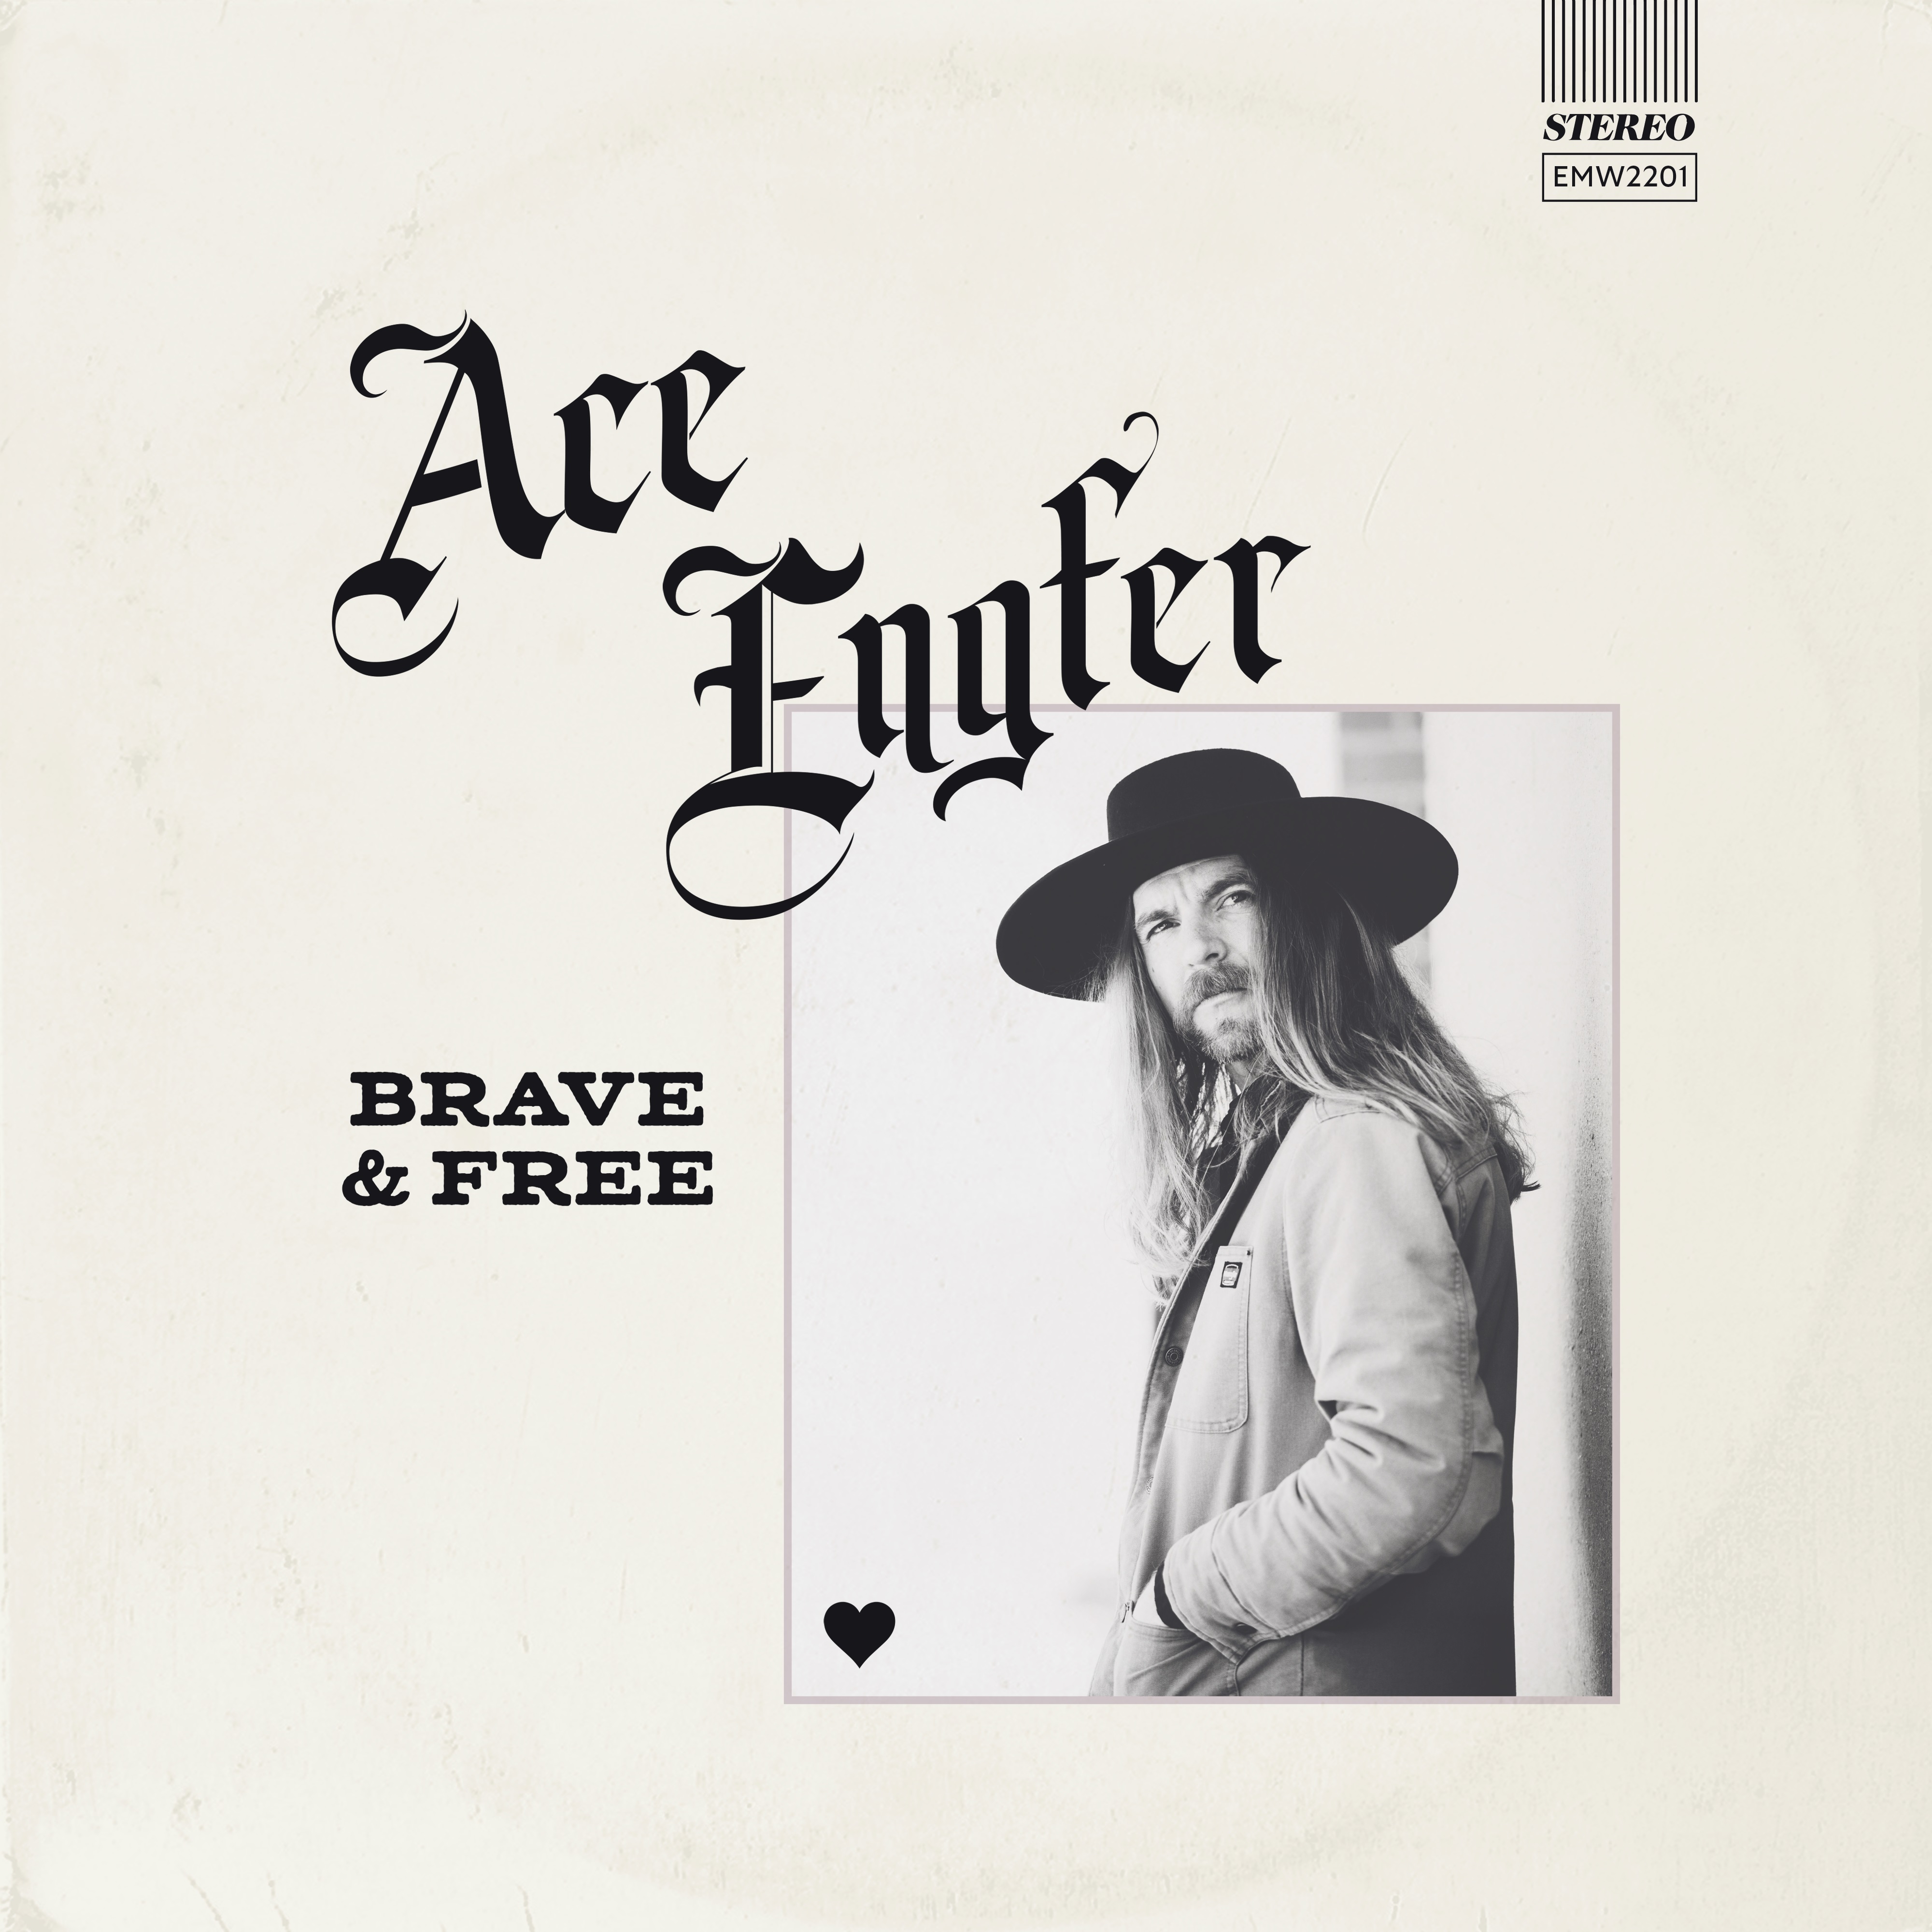 Ace Engfer’s debut solo album ‘Brave & Free’ to be released on digital platforms June 3, 2022